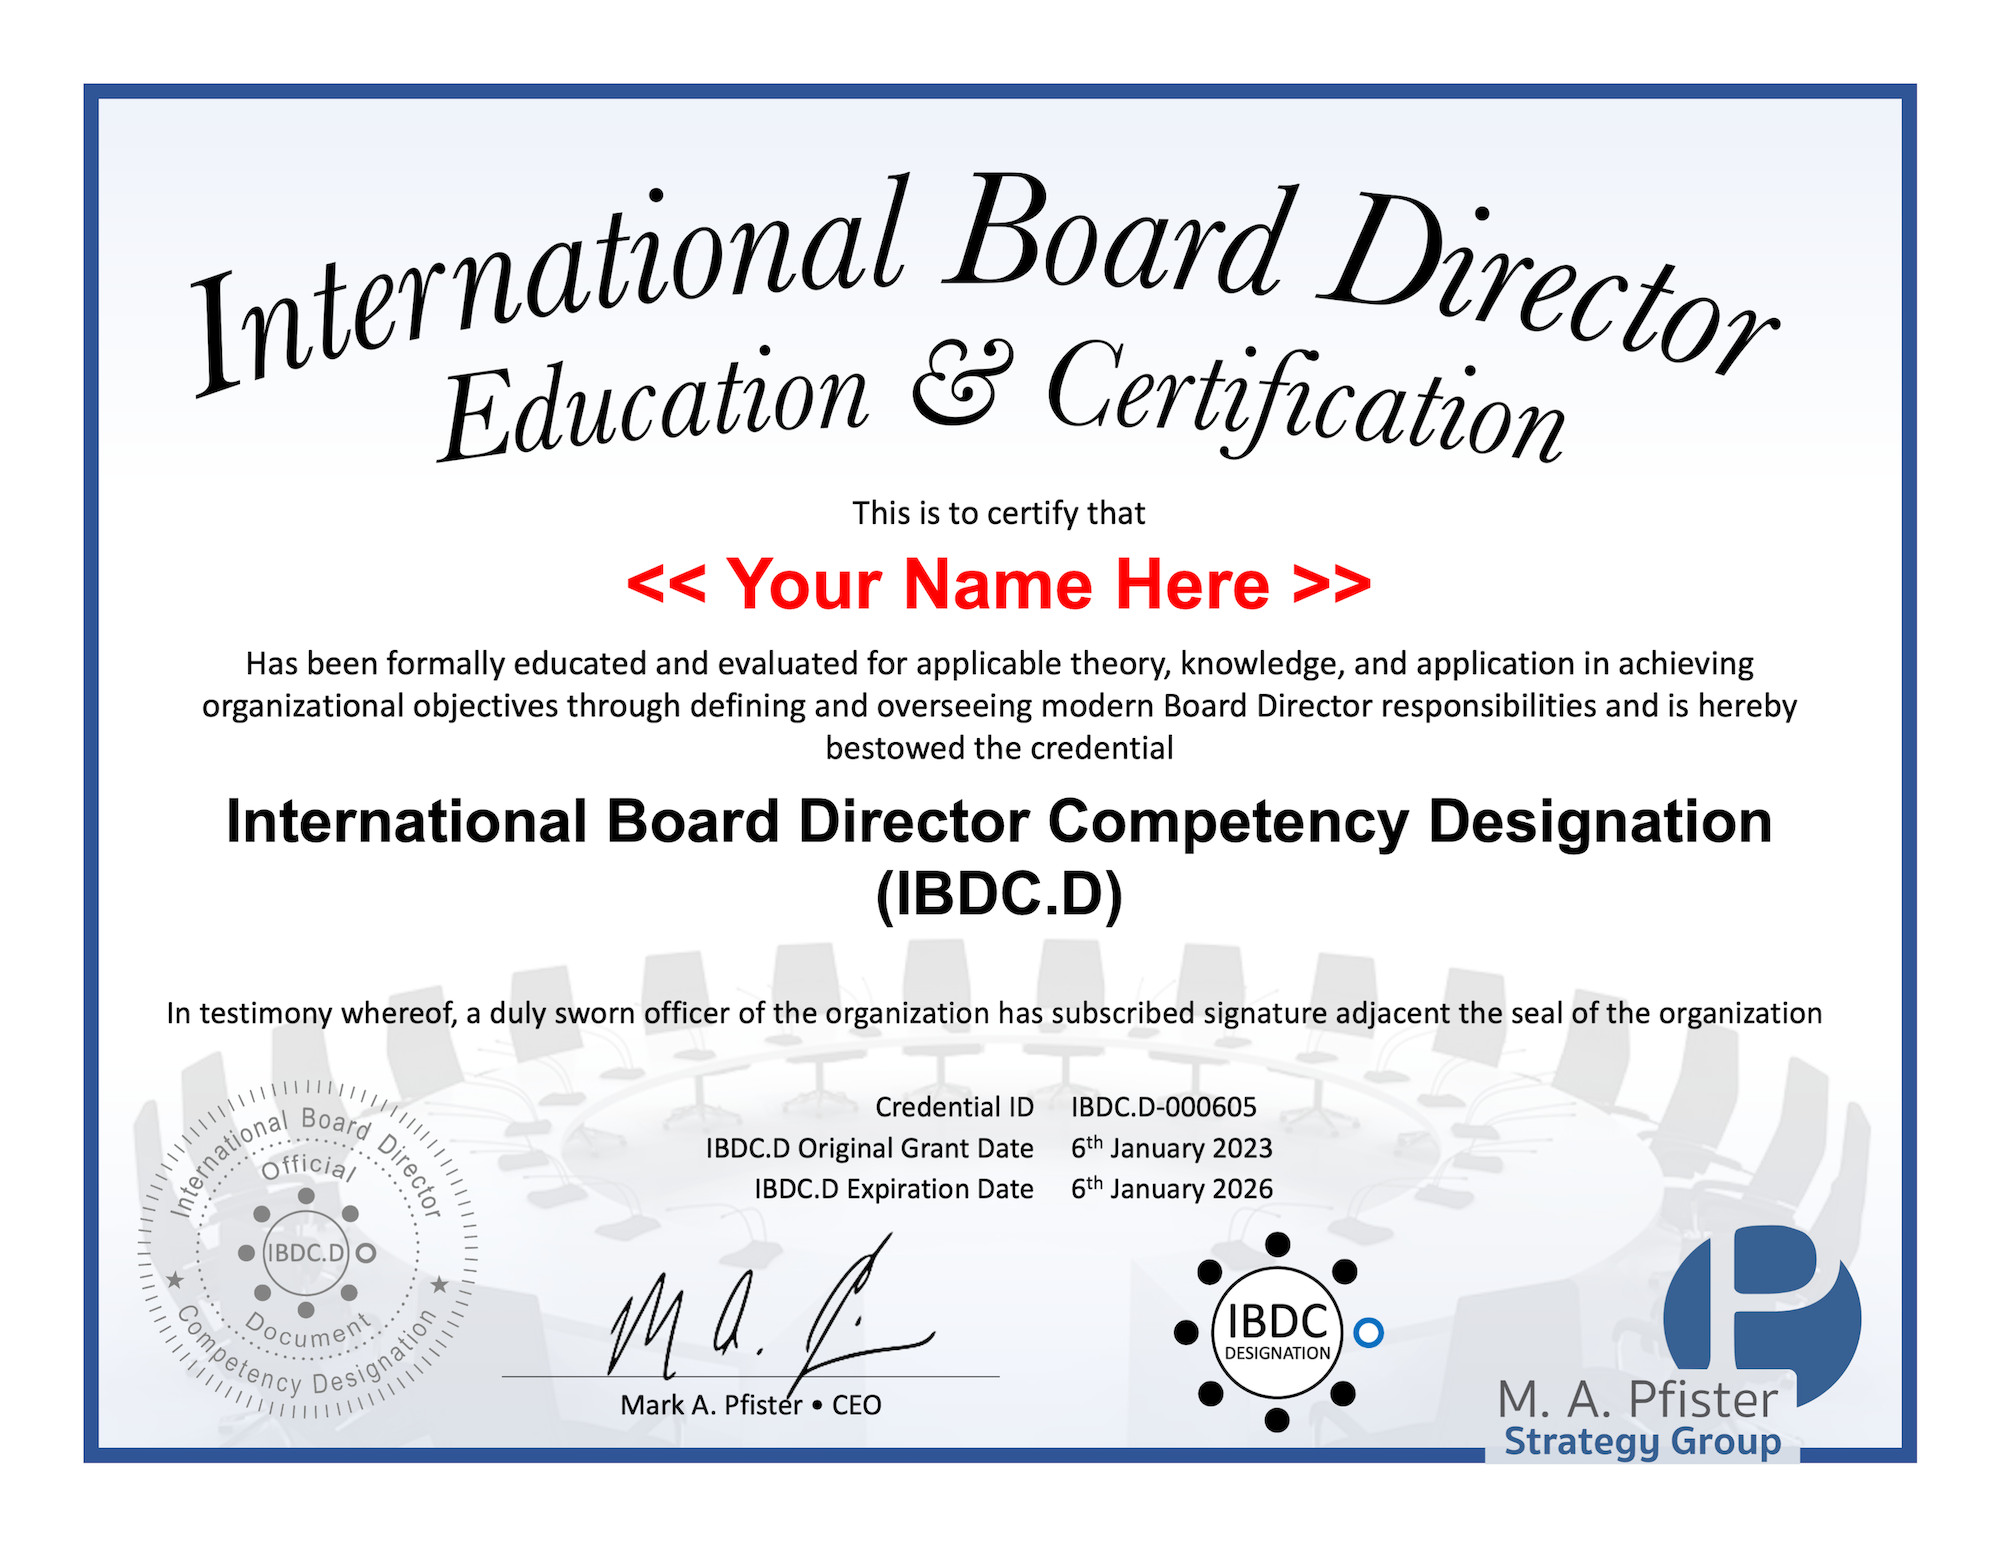 International Board Director Education and Certification